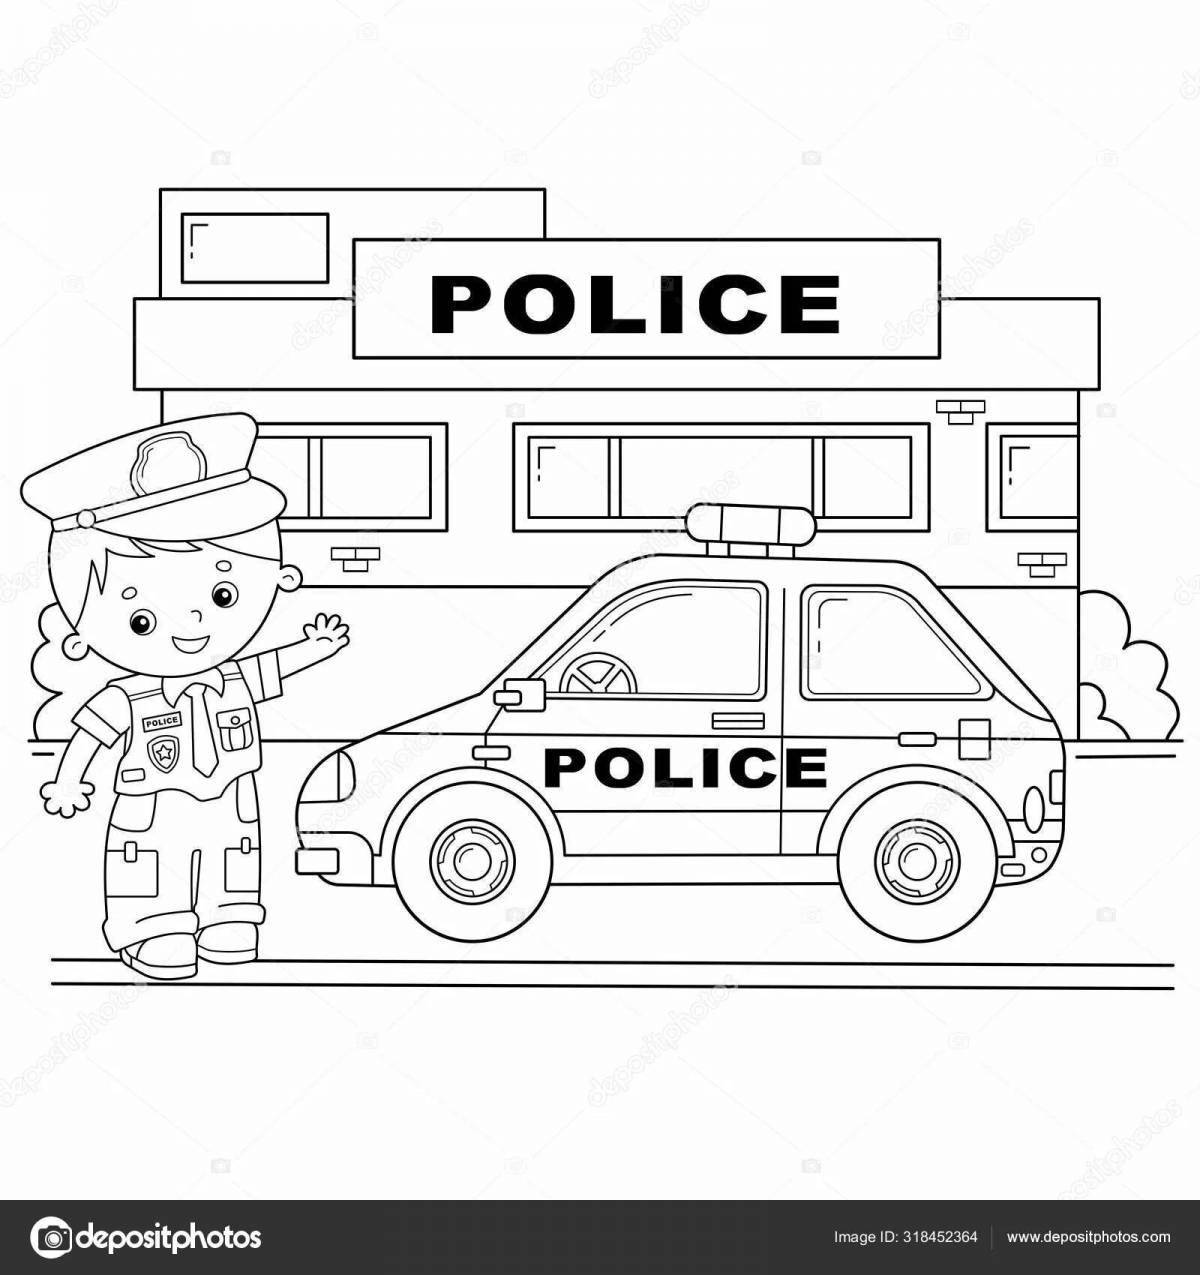 Coloring book is an alluring police profession